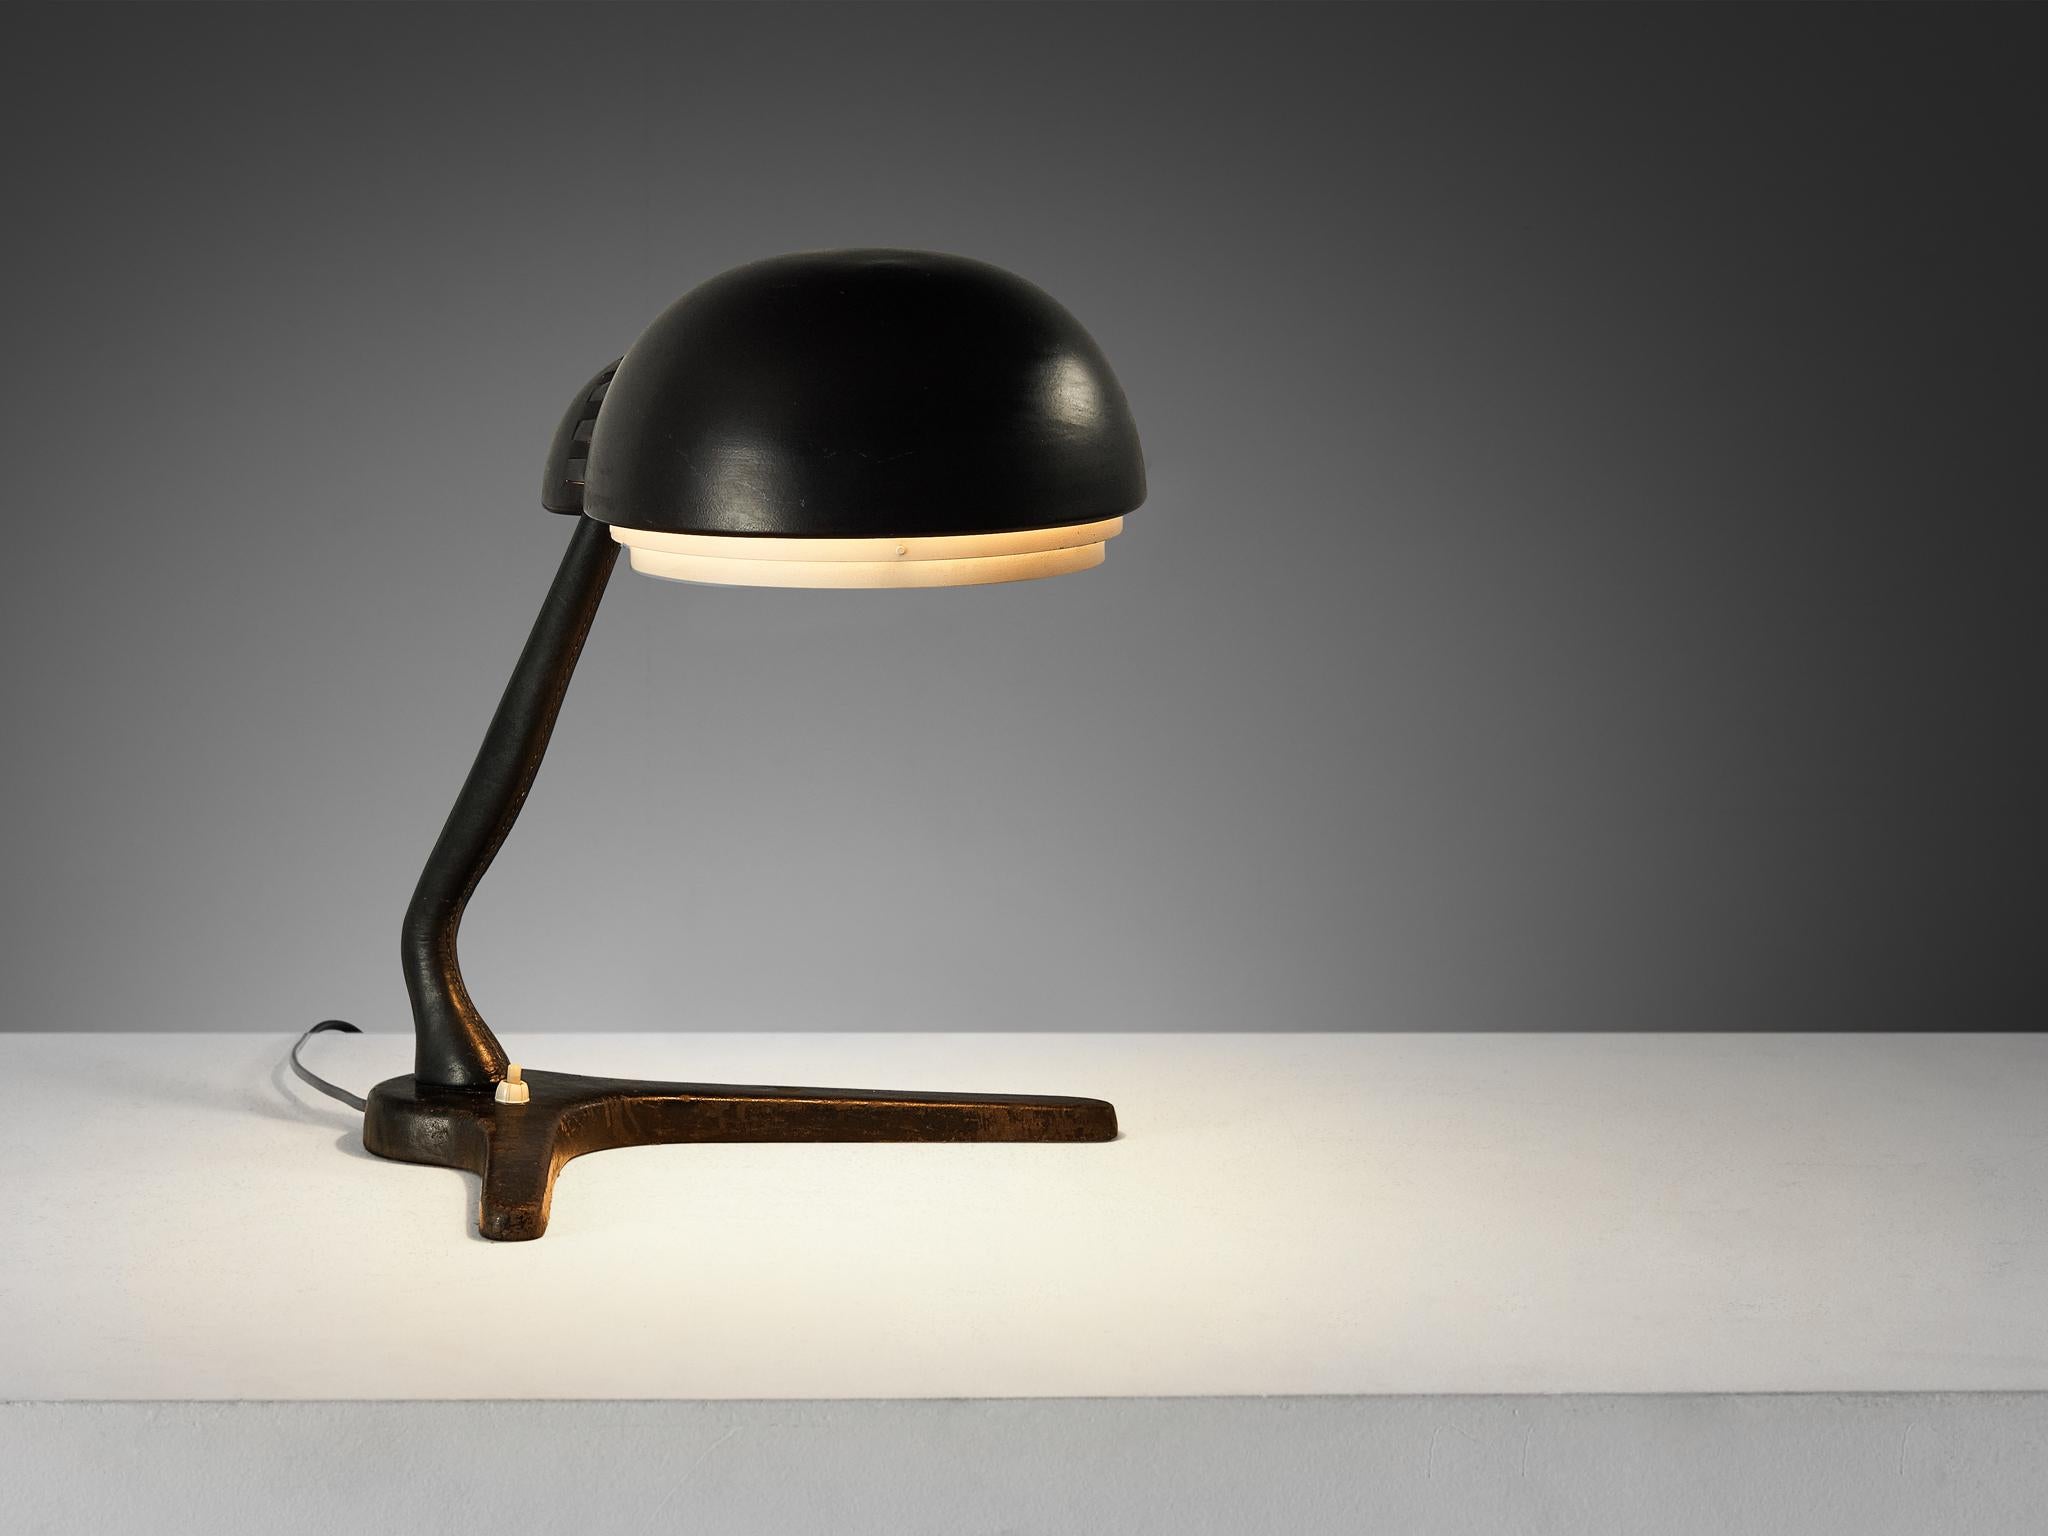 Alvar Aalto for Valaistustyö Ky, desk lamp, model ‘A704’, enameled steel, enameled aluminum, leather-bound metal, Finland, 1954 
 
This table lamp model ‘A704’ is designed by Finnish modernist architect and industrial designer Alvar Aalto for